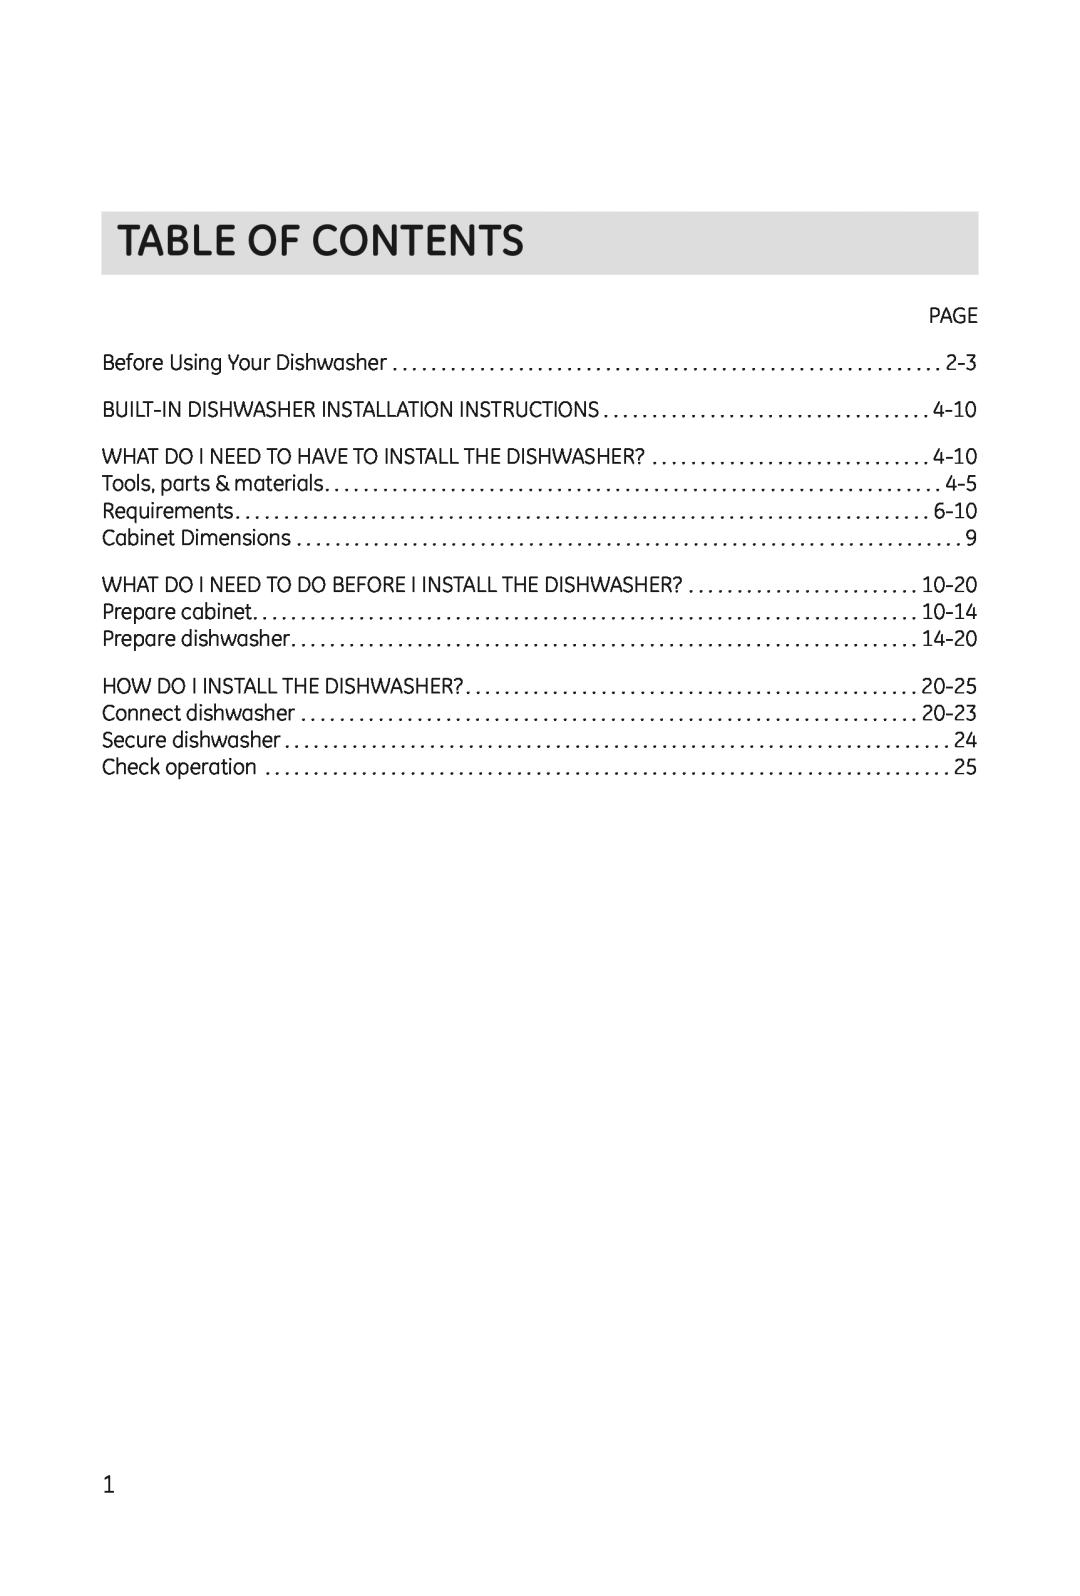 Haier DWL3025 installation manual Table Of Contents, Page 